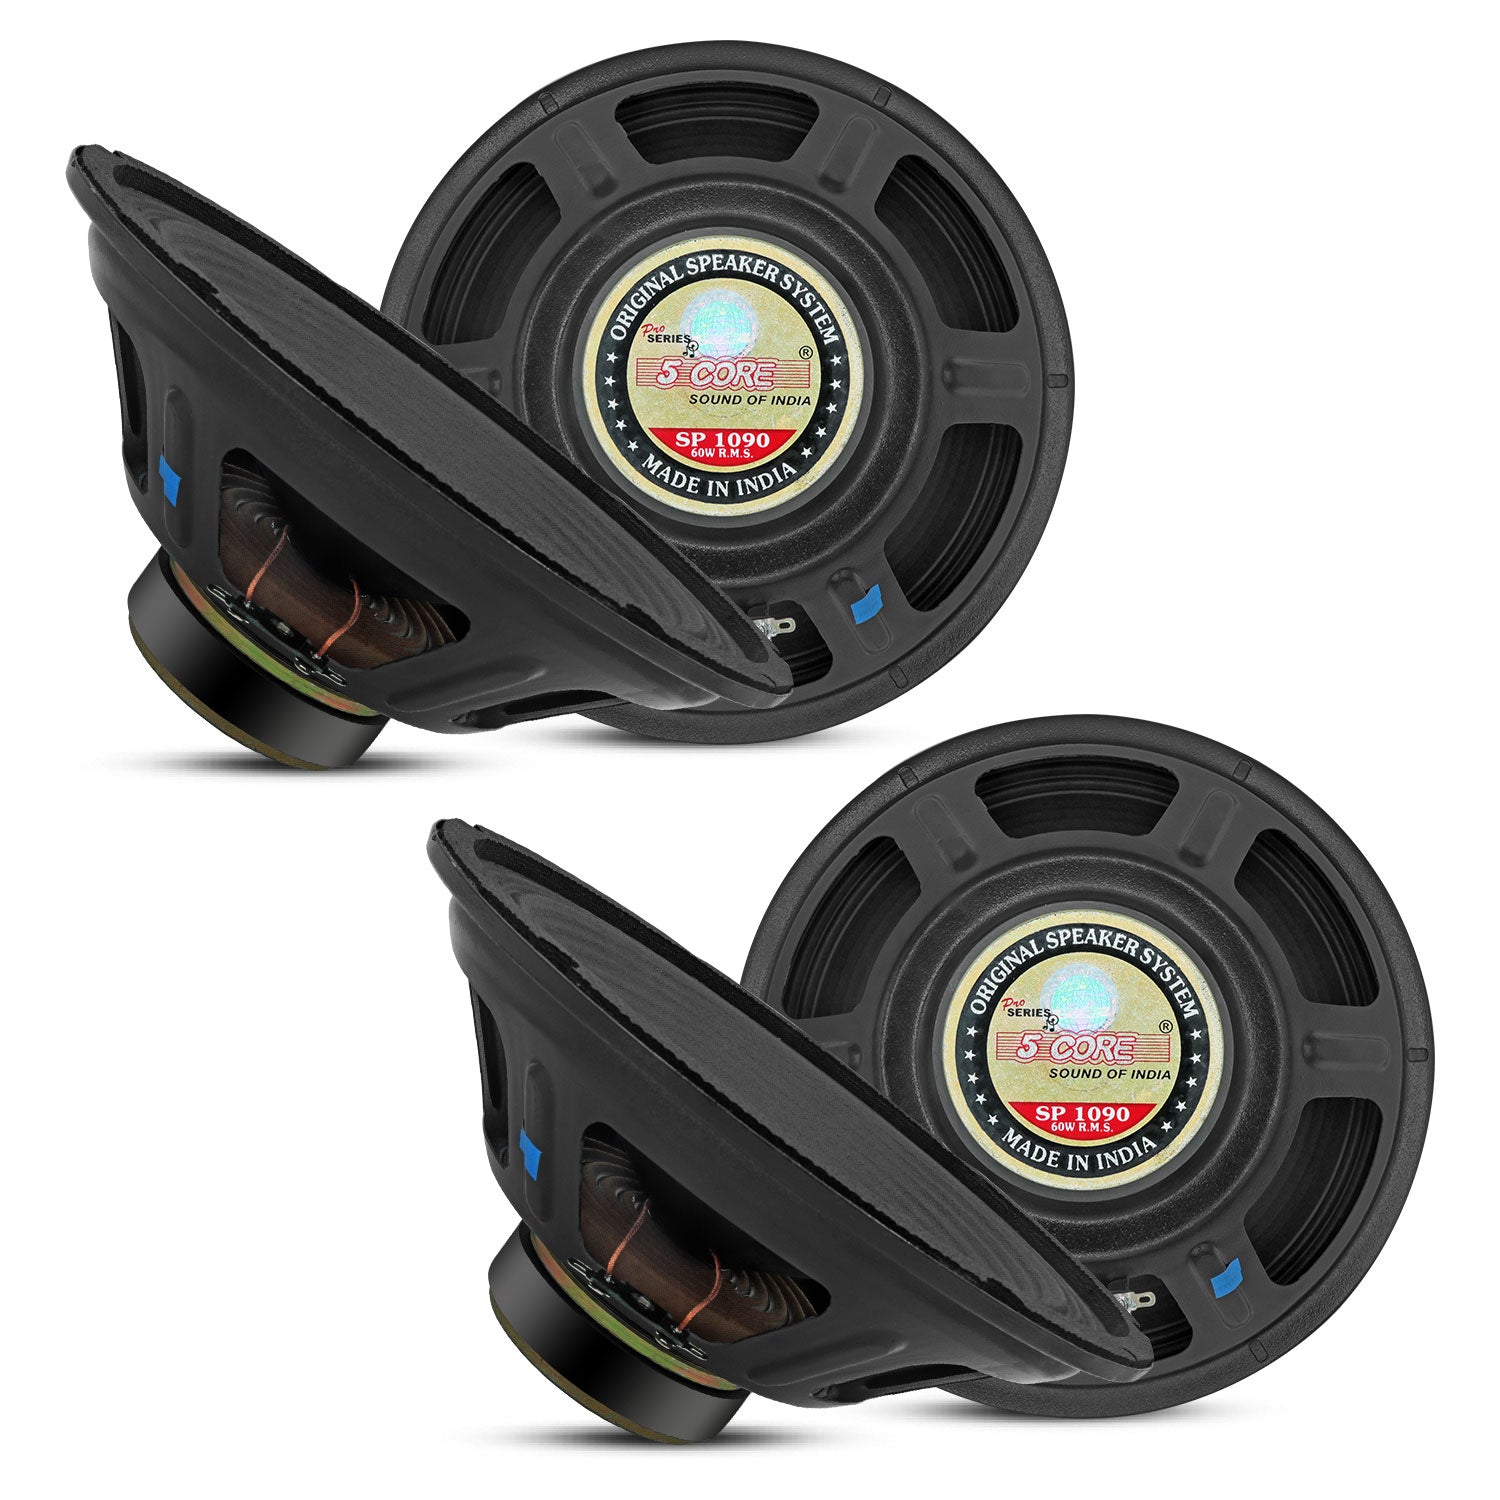 5 Core 10 Inch Subwoofer 2 Pack • 600W Peak • 4 Ohm Replacement Car Bass Sub Woofer • 1" Voice Coil